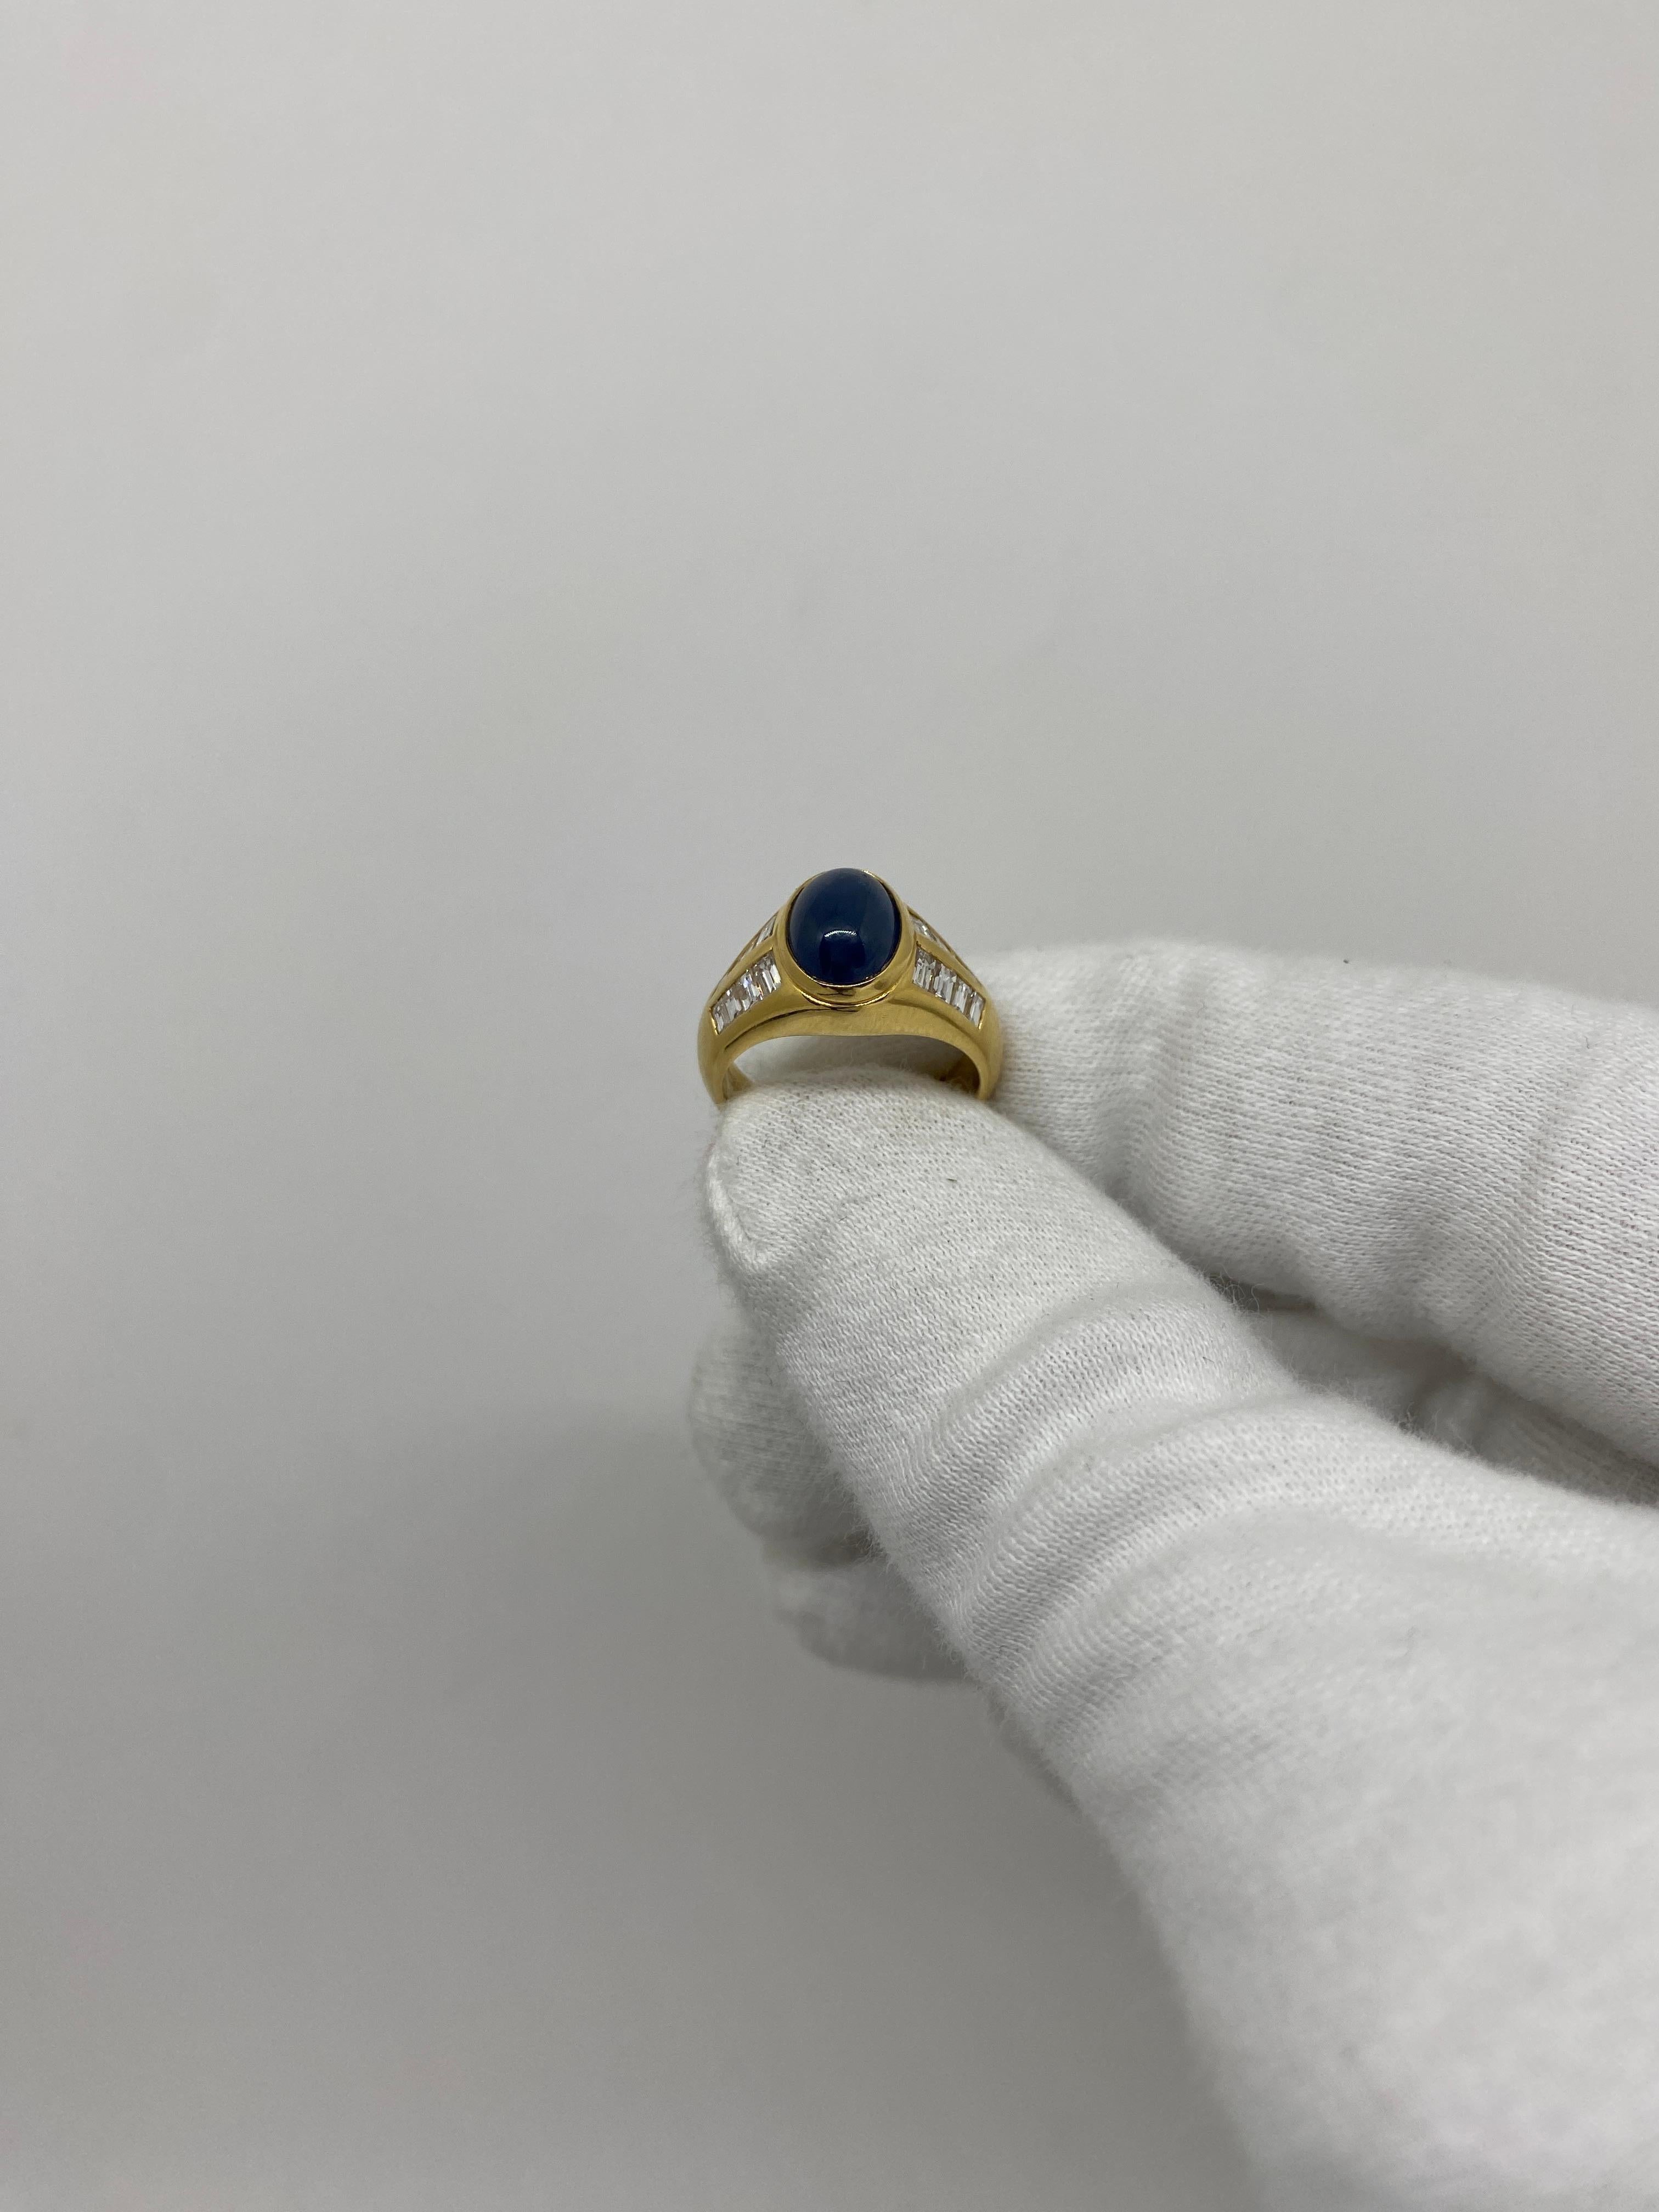 Band ring made of 18kt yellow gold with cabochon-cut oval sapphire for ct .2.80 and natural white baguette-cut diamonds for ct .0.97

Welcome to our jewelry collection, where every piece tells a story of timeless elegance and unparalleled